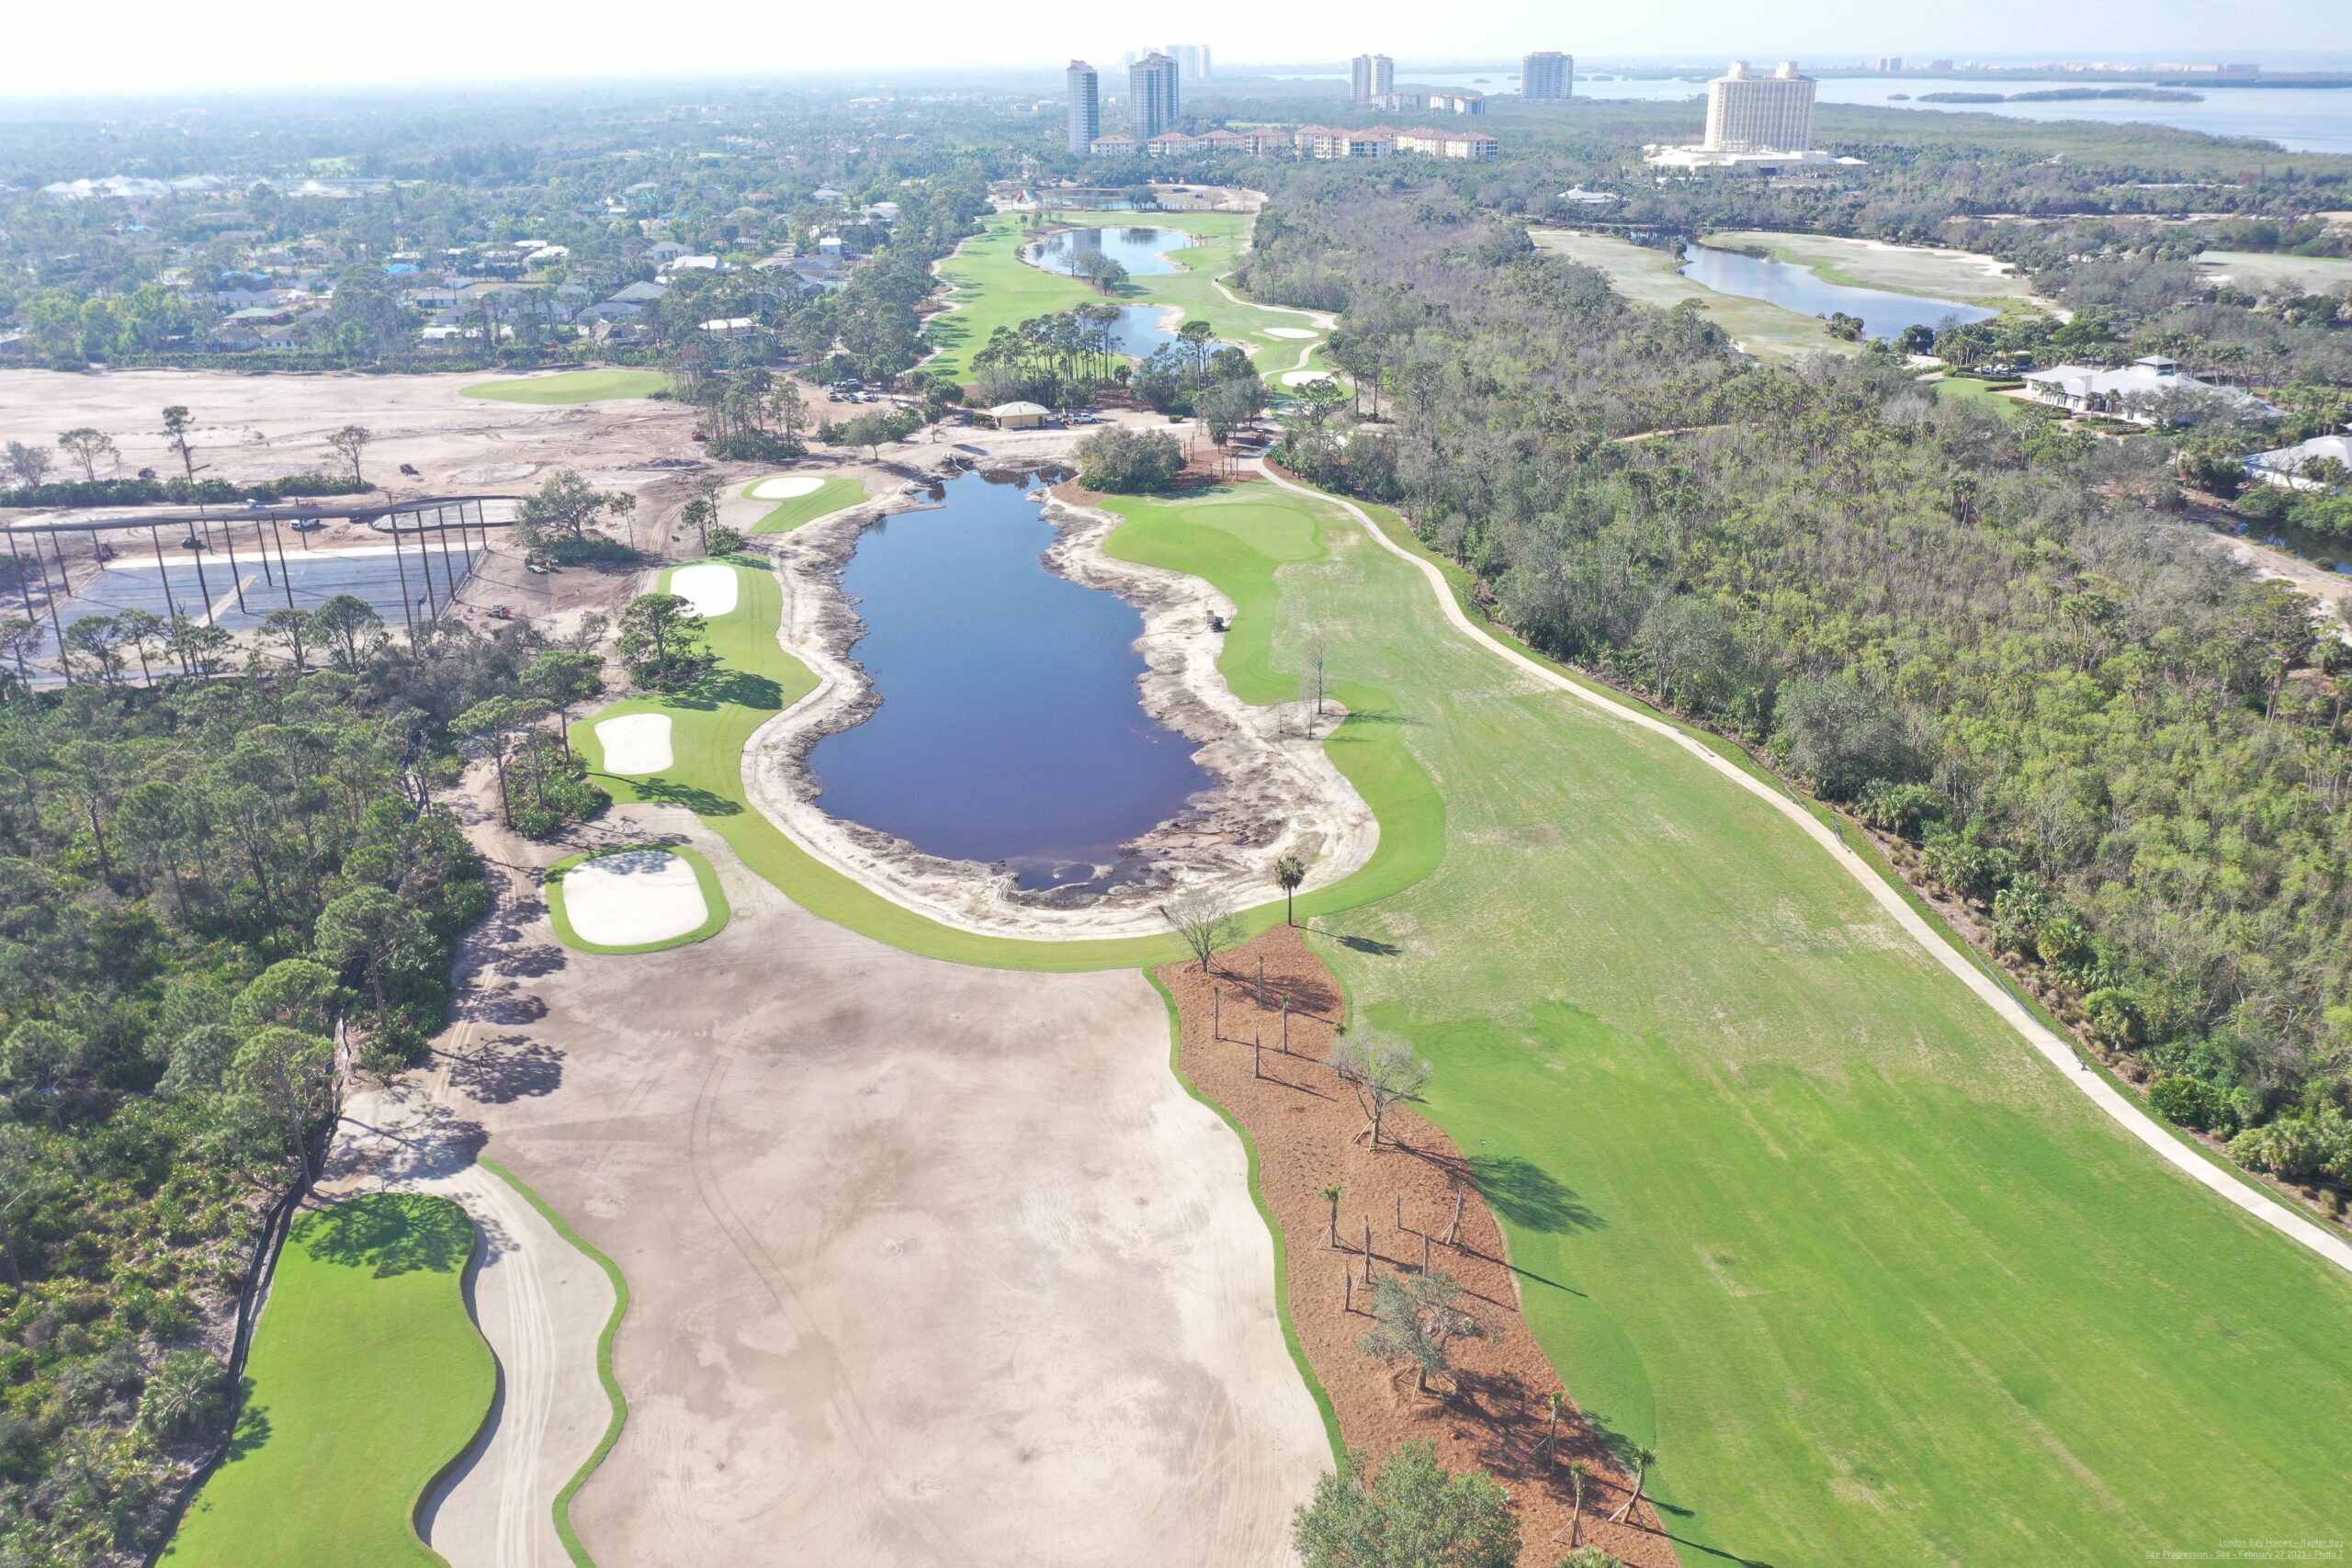 An aerial view of the Saltleaf Golf Preserve, a championship golf course in Bonita Springs, with a serene pond.